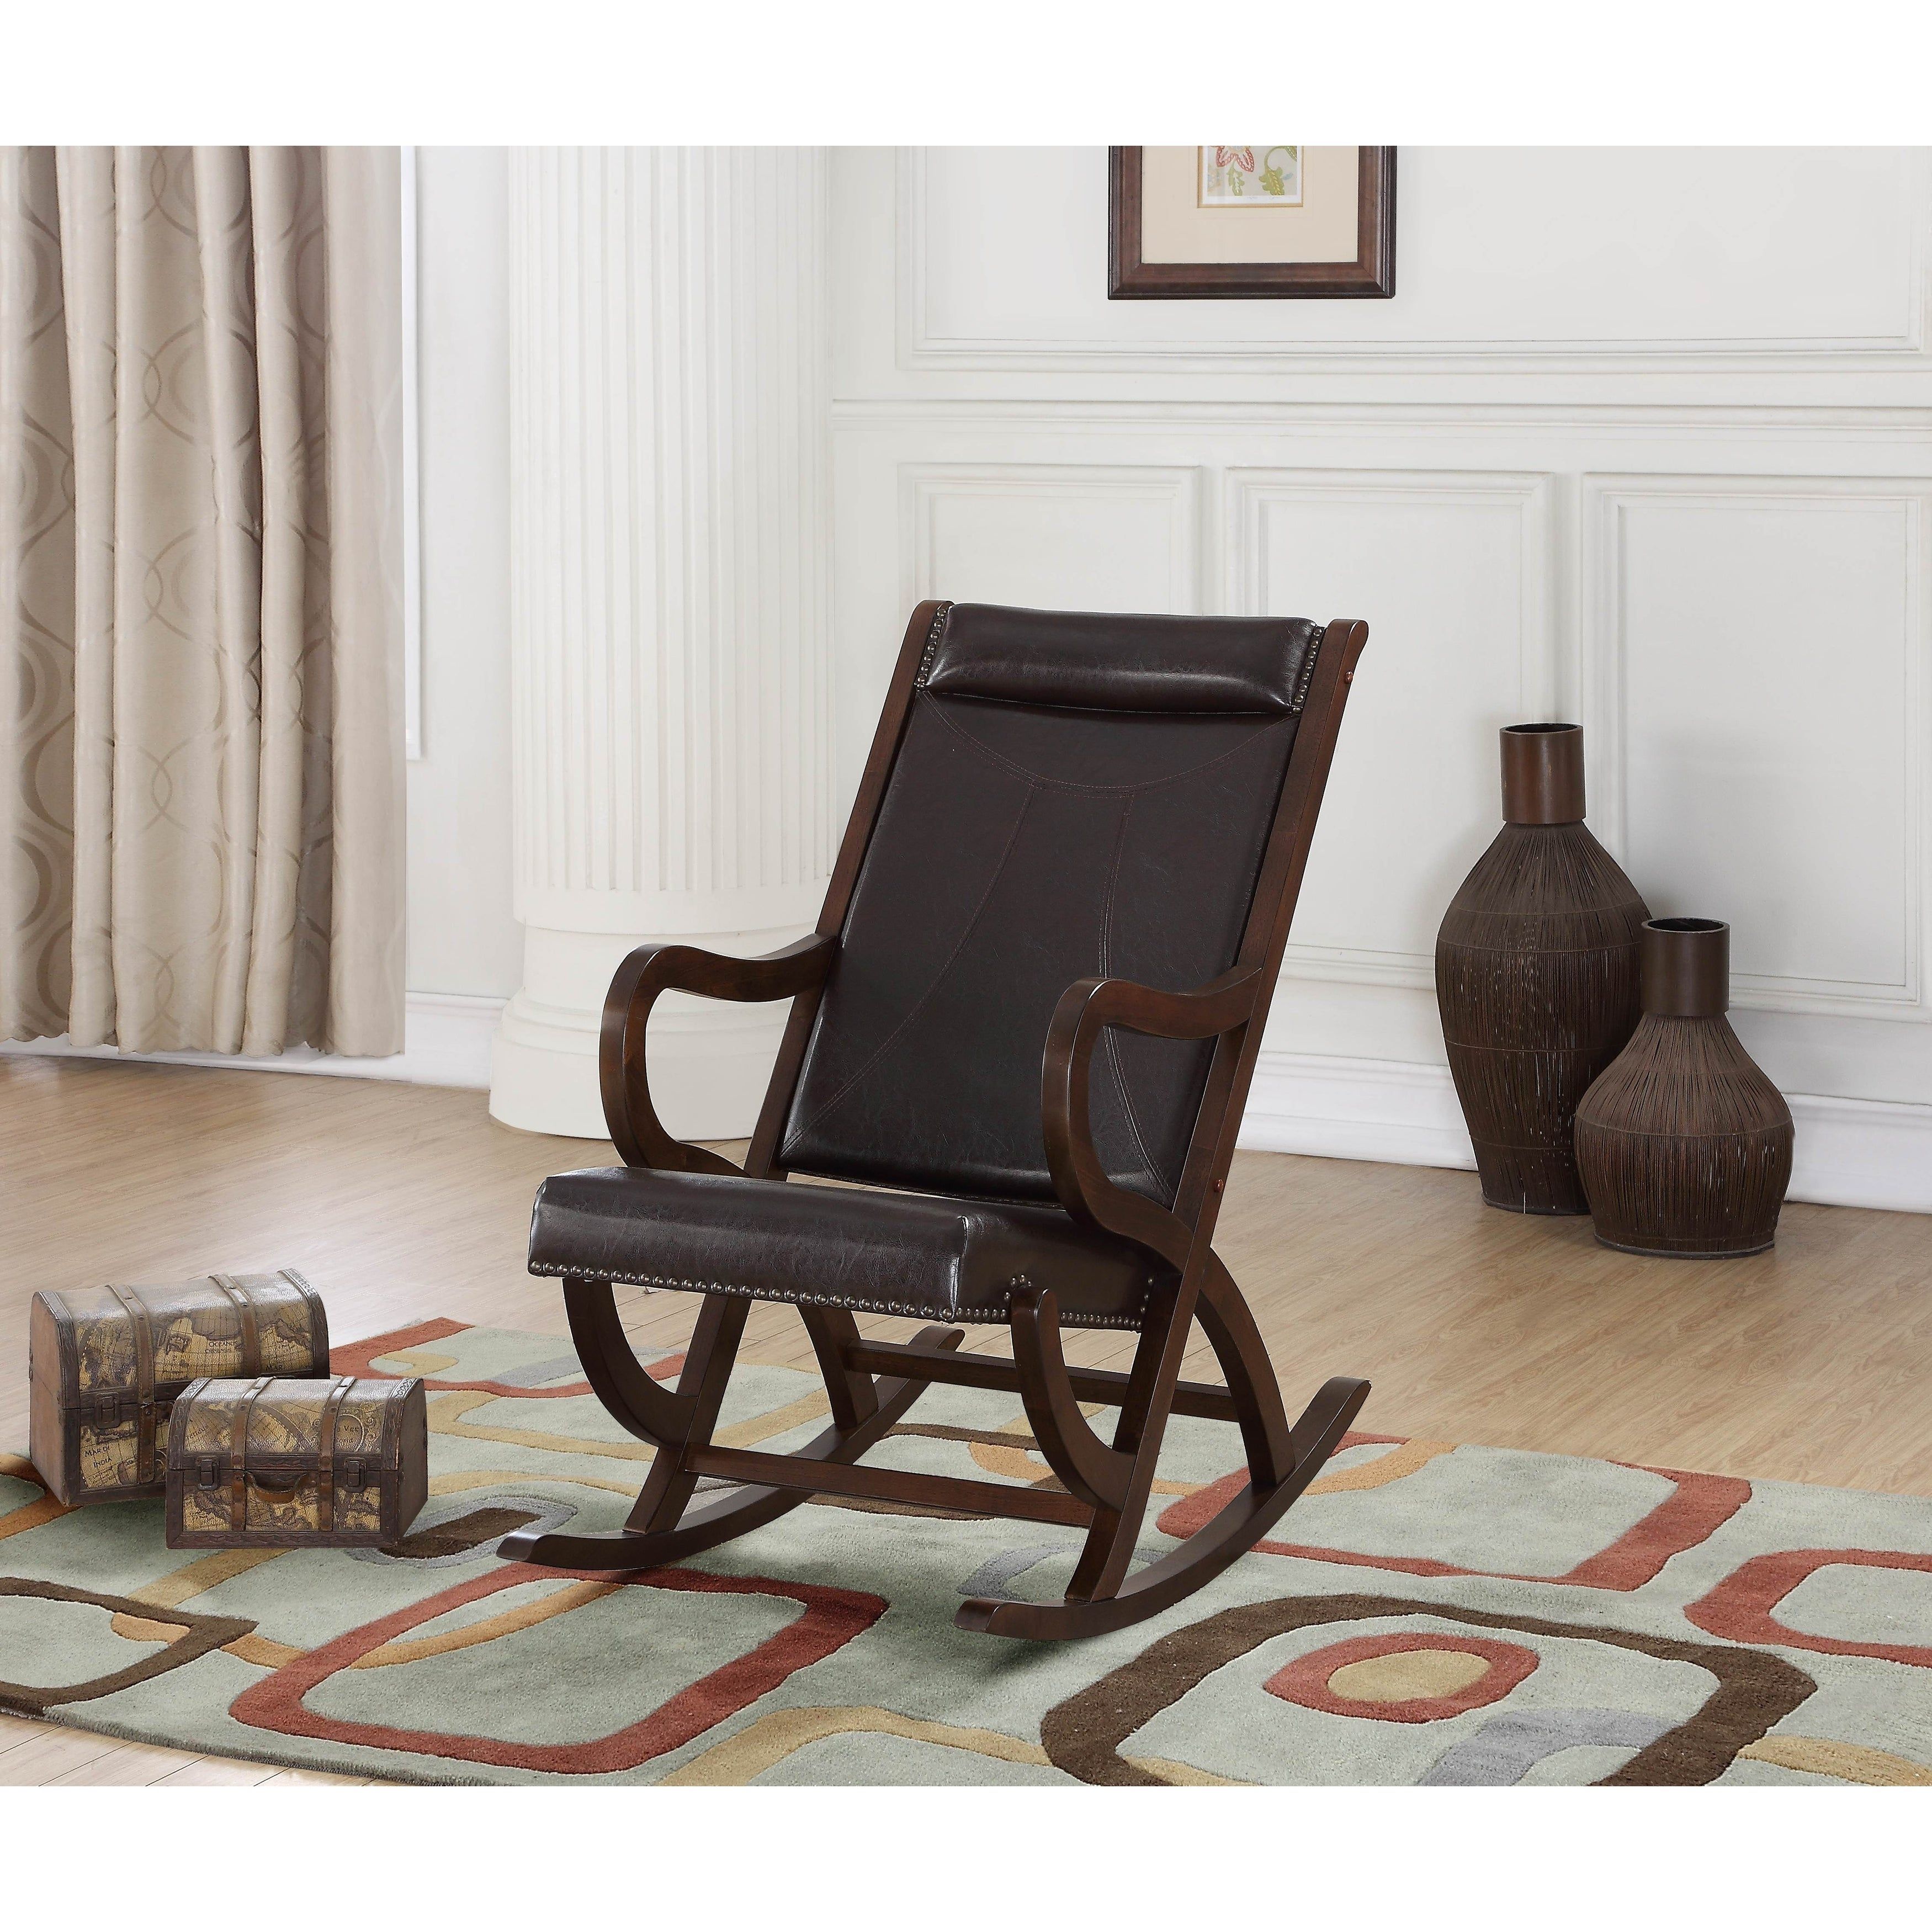 Featured Photo of 20 The Best Carbon Loft Ariel Rocking Chairs in Espresso Pu and Walnut